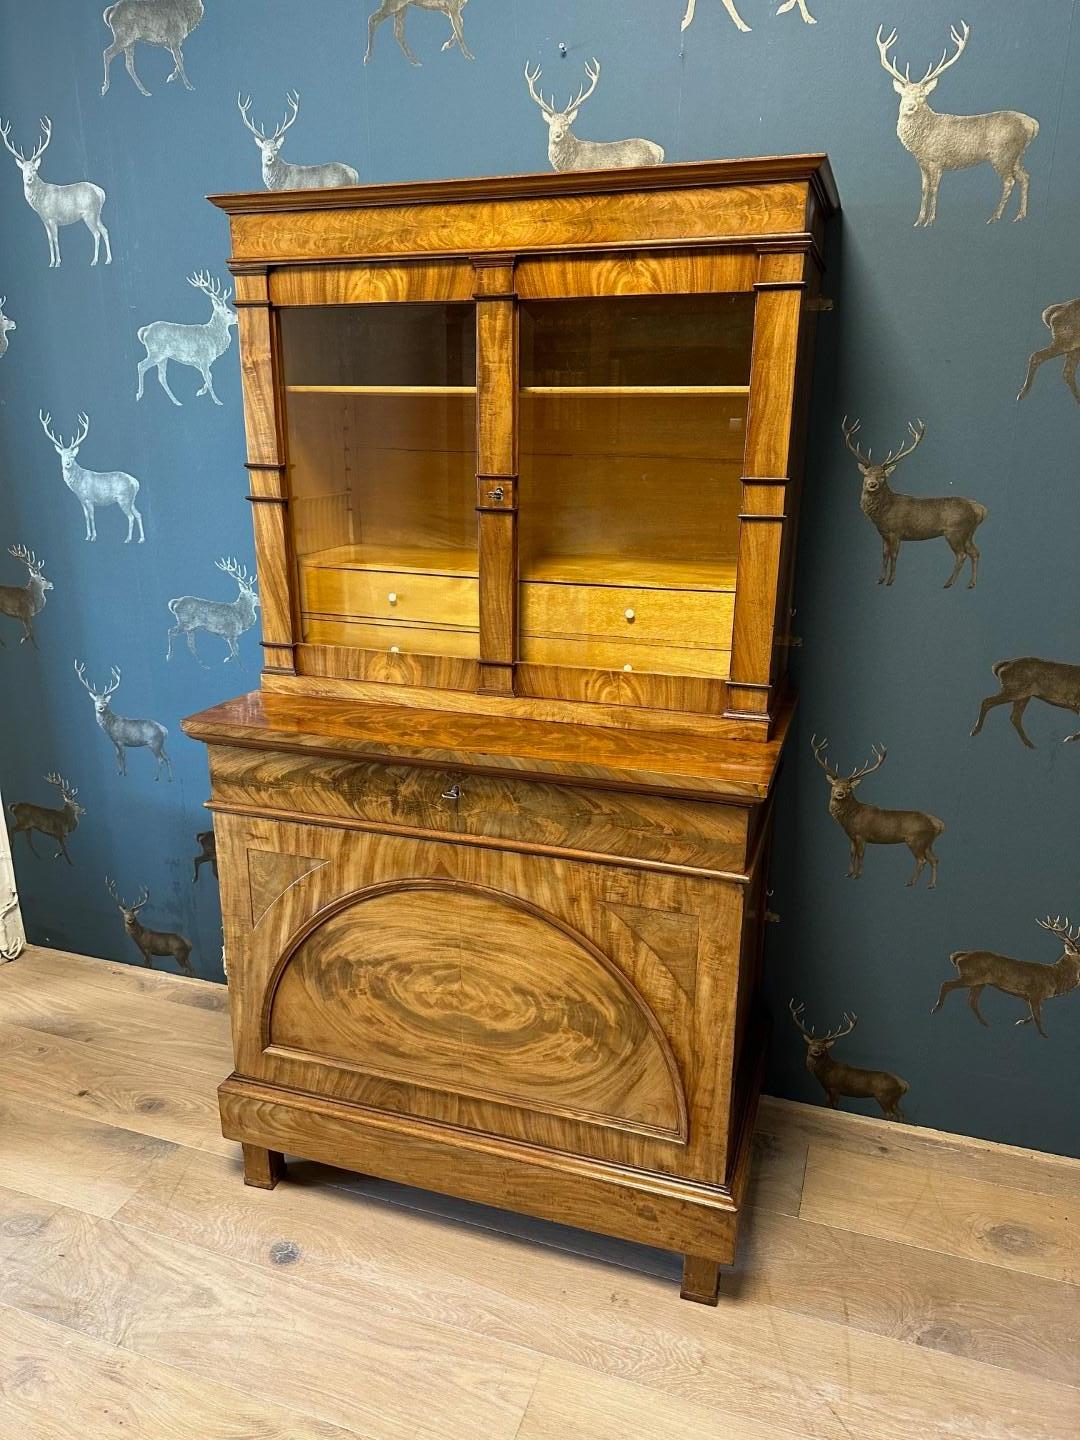 Bonheur du jour or ladies' desk in mahogany with floral mahogany and satinwood. Beautiful warm lived-in color. The base cabinet with a large door containing an arched panel and a wide drawer containing a red with gold-edged writing surface. The